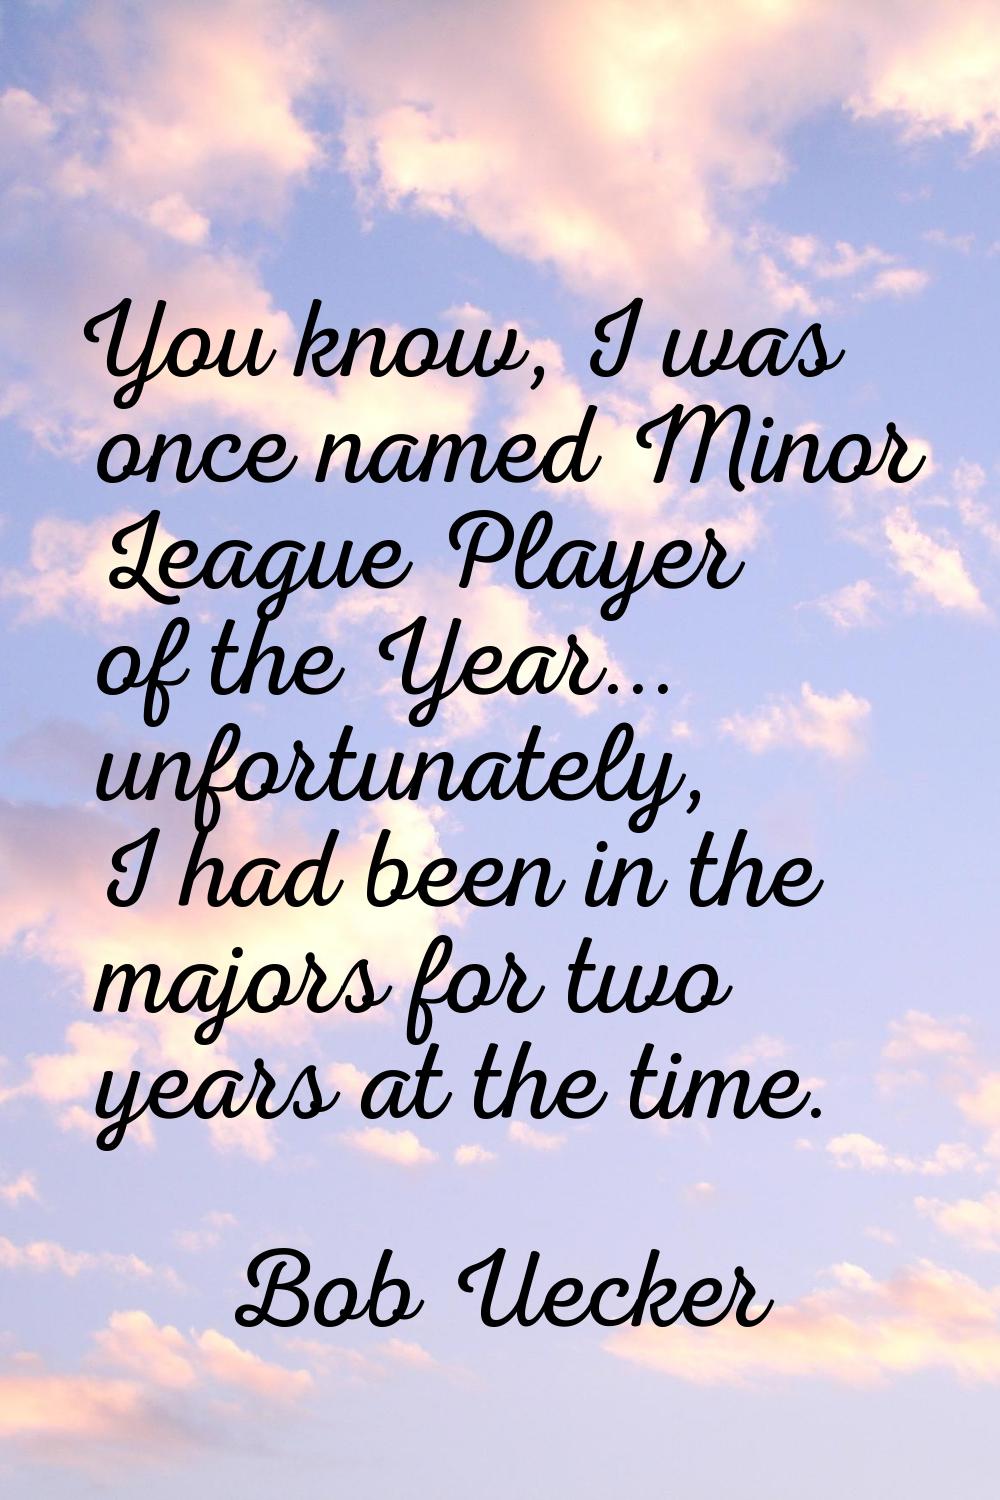 You know, I was once named Minor League Player of the Year... unfortunately, I had been in the majo